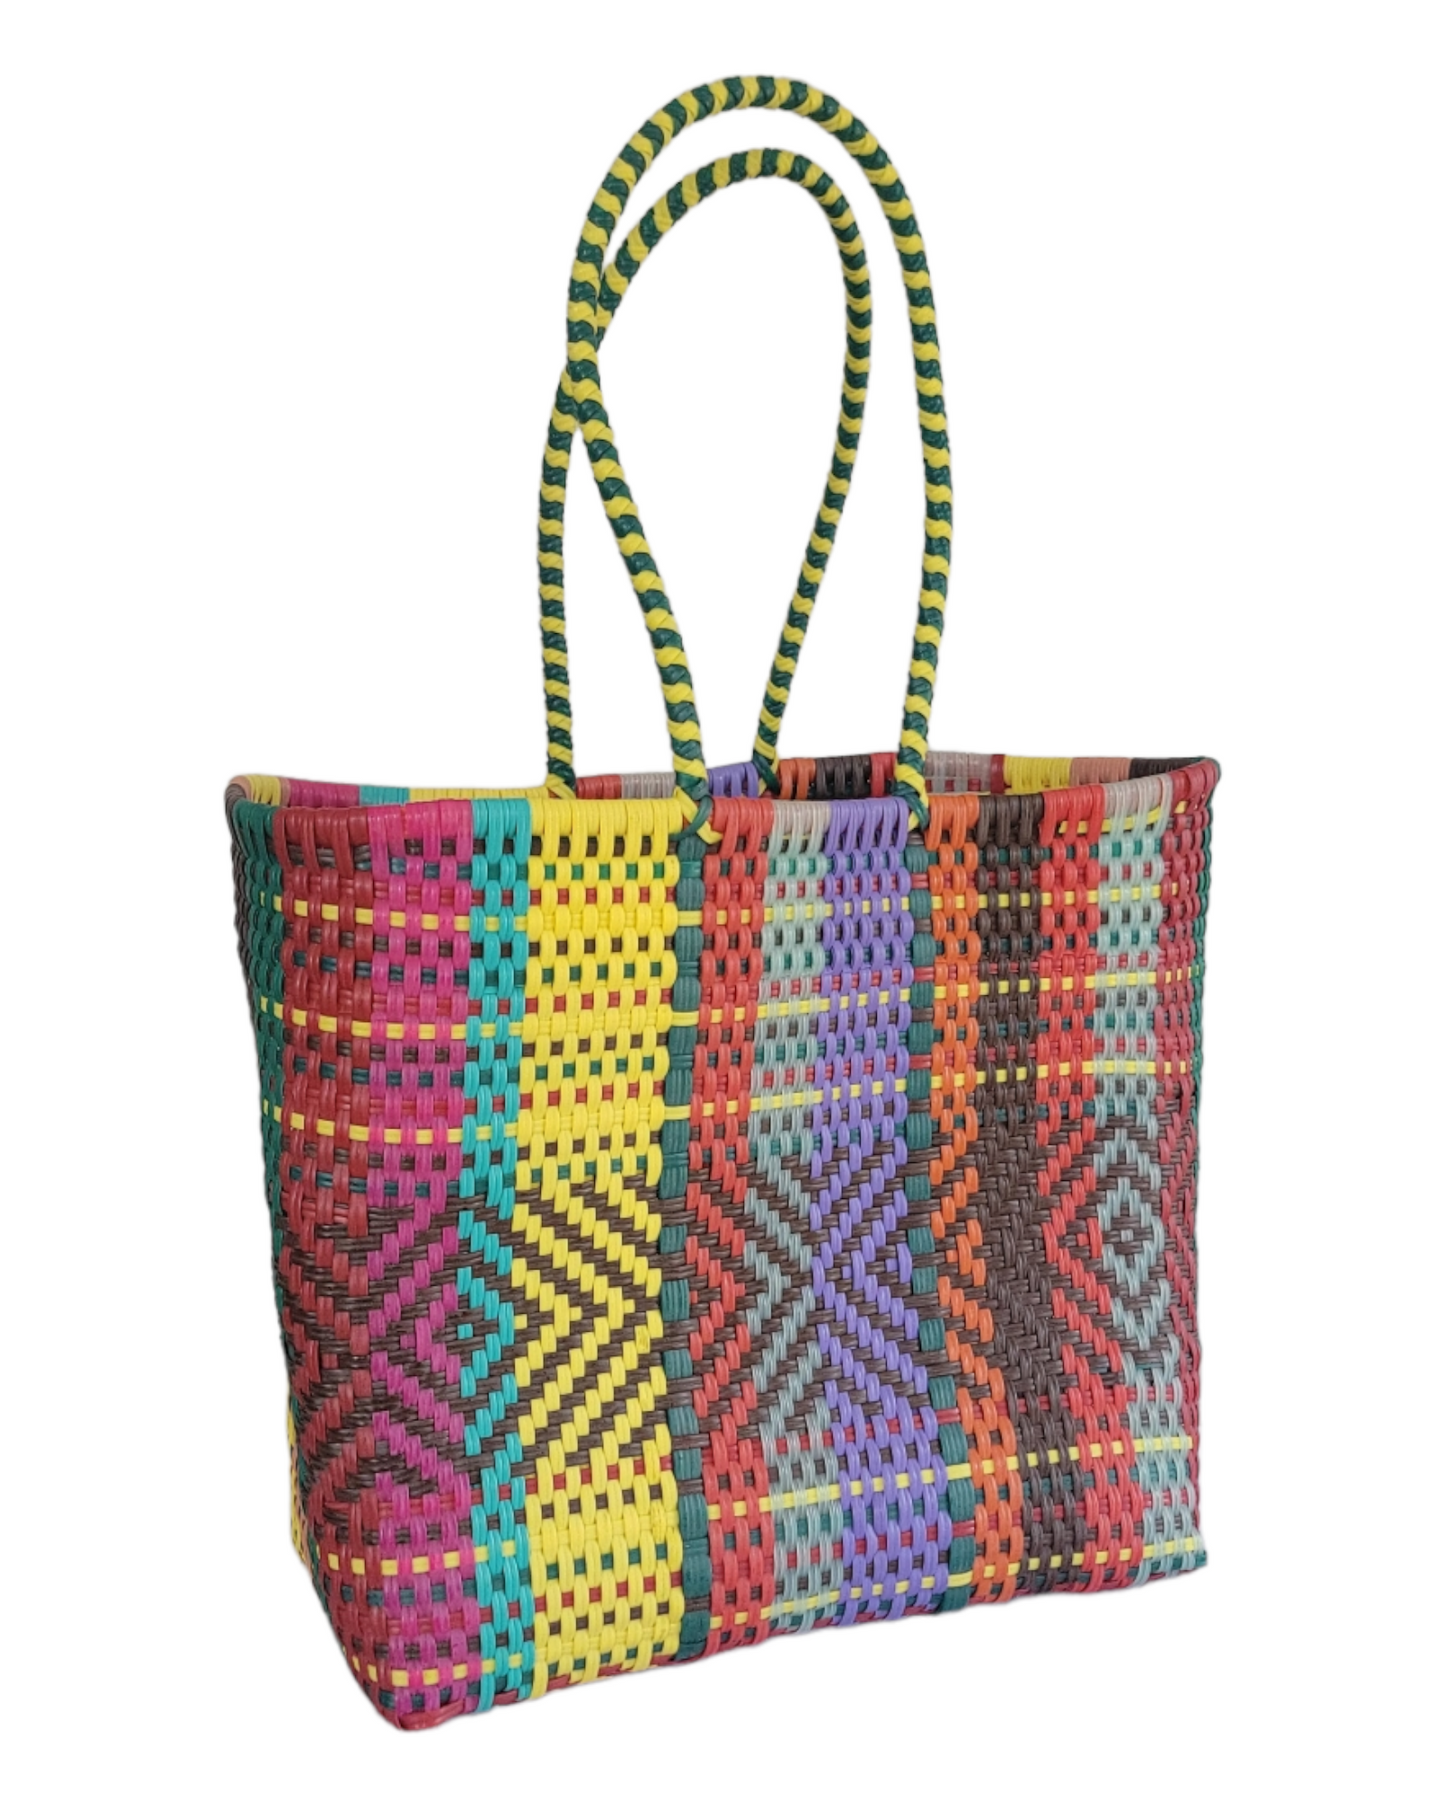 Be Praia|Multicolor Medium Tote | Handwoven Recycled Bags